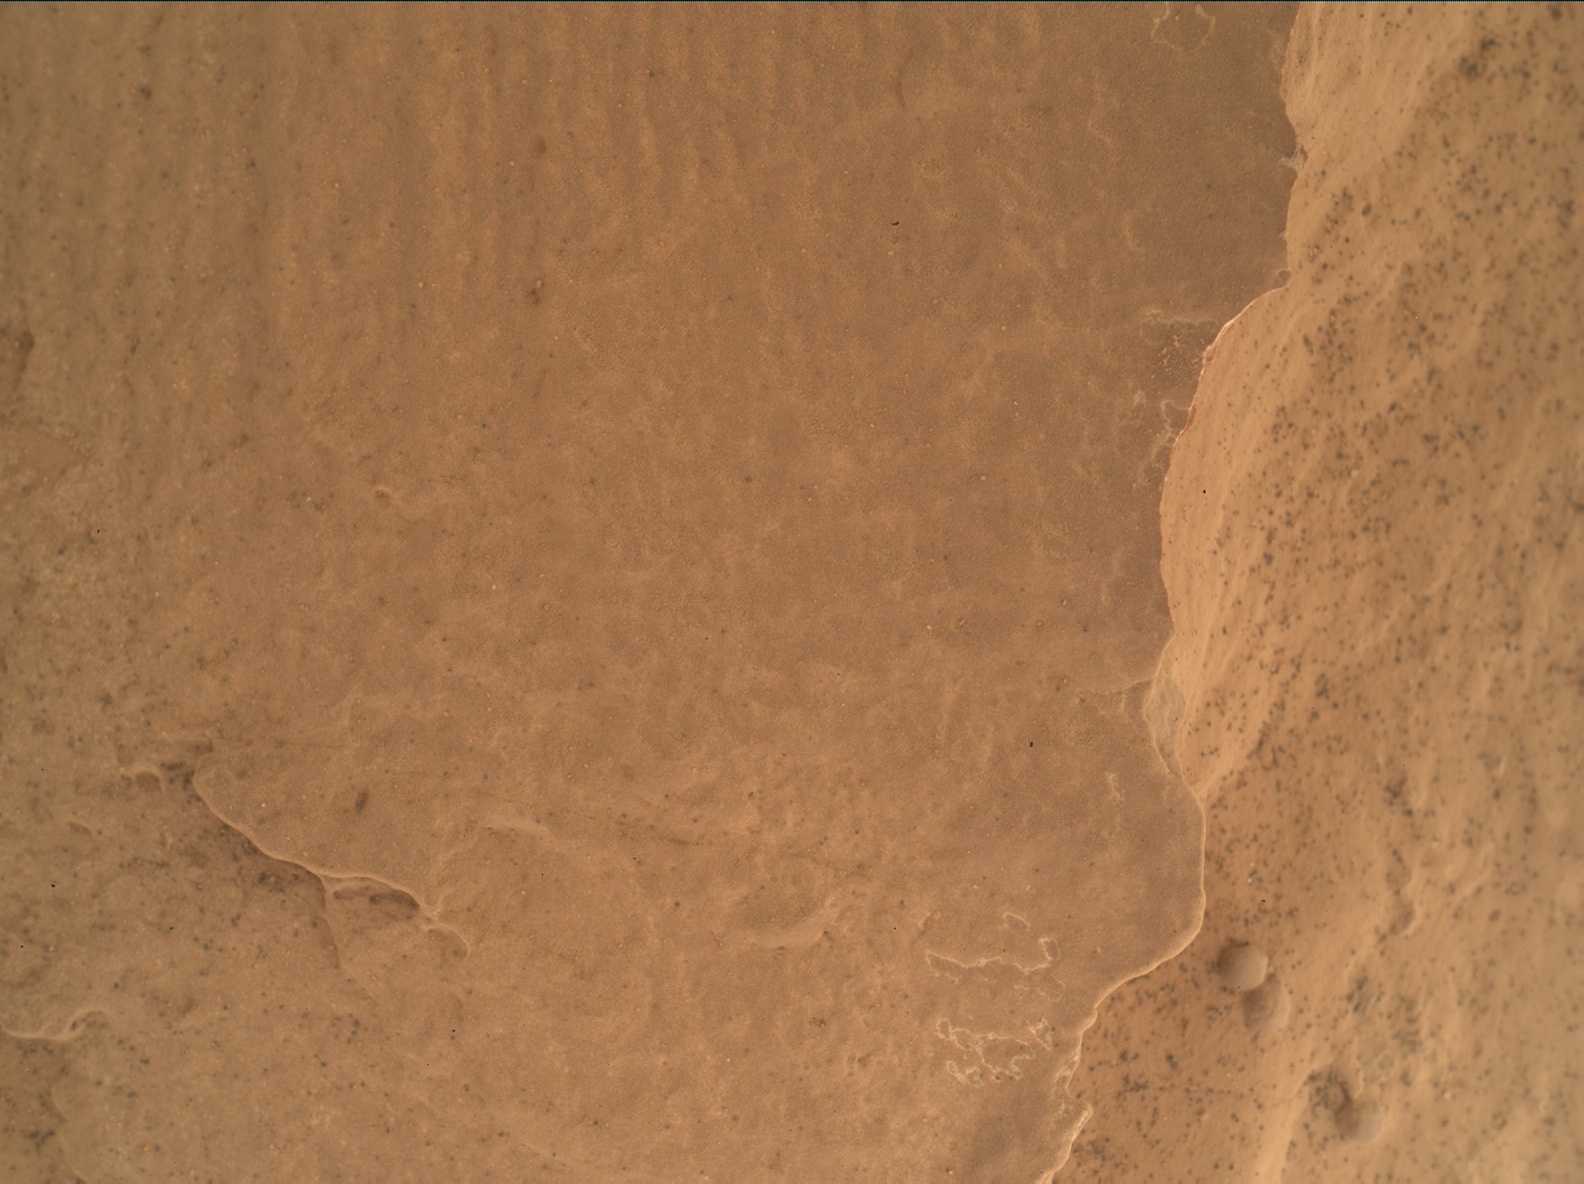 Nasa's Mars rover Curiosity acquired this image using its Mars Hand Lens Imager (MAHLI) on Sol 1734